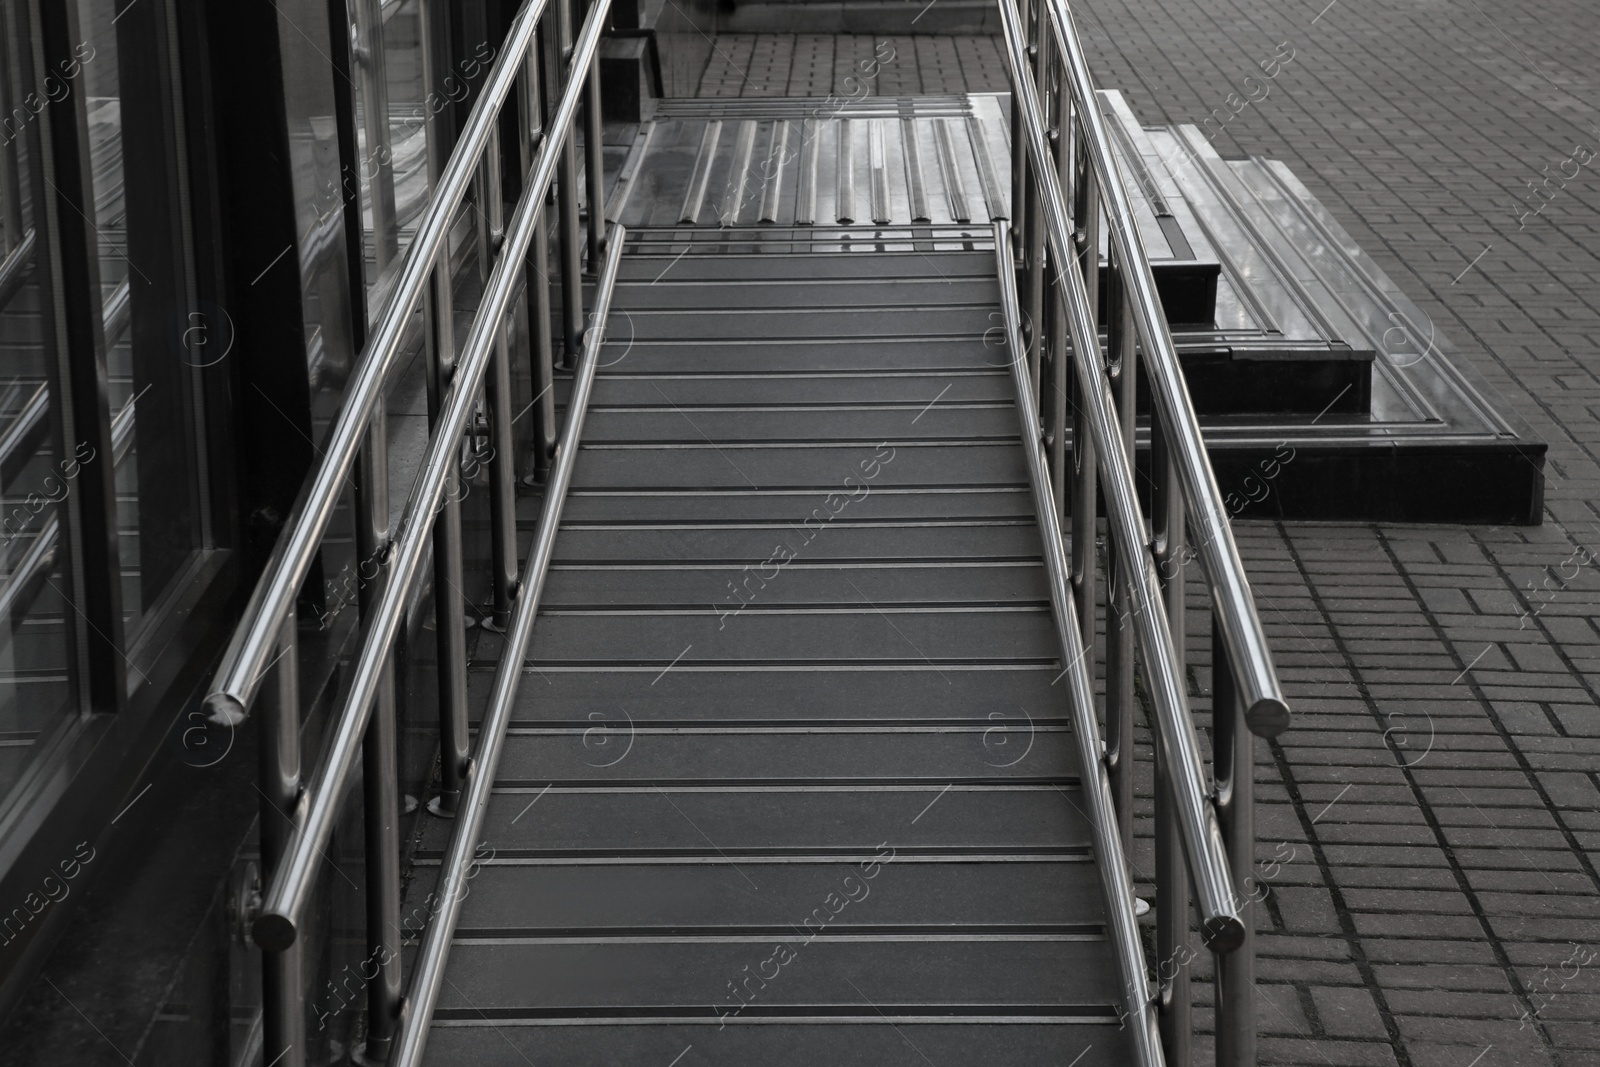 Photo of Ramp with metal railings near building outdoors